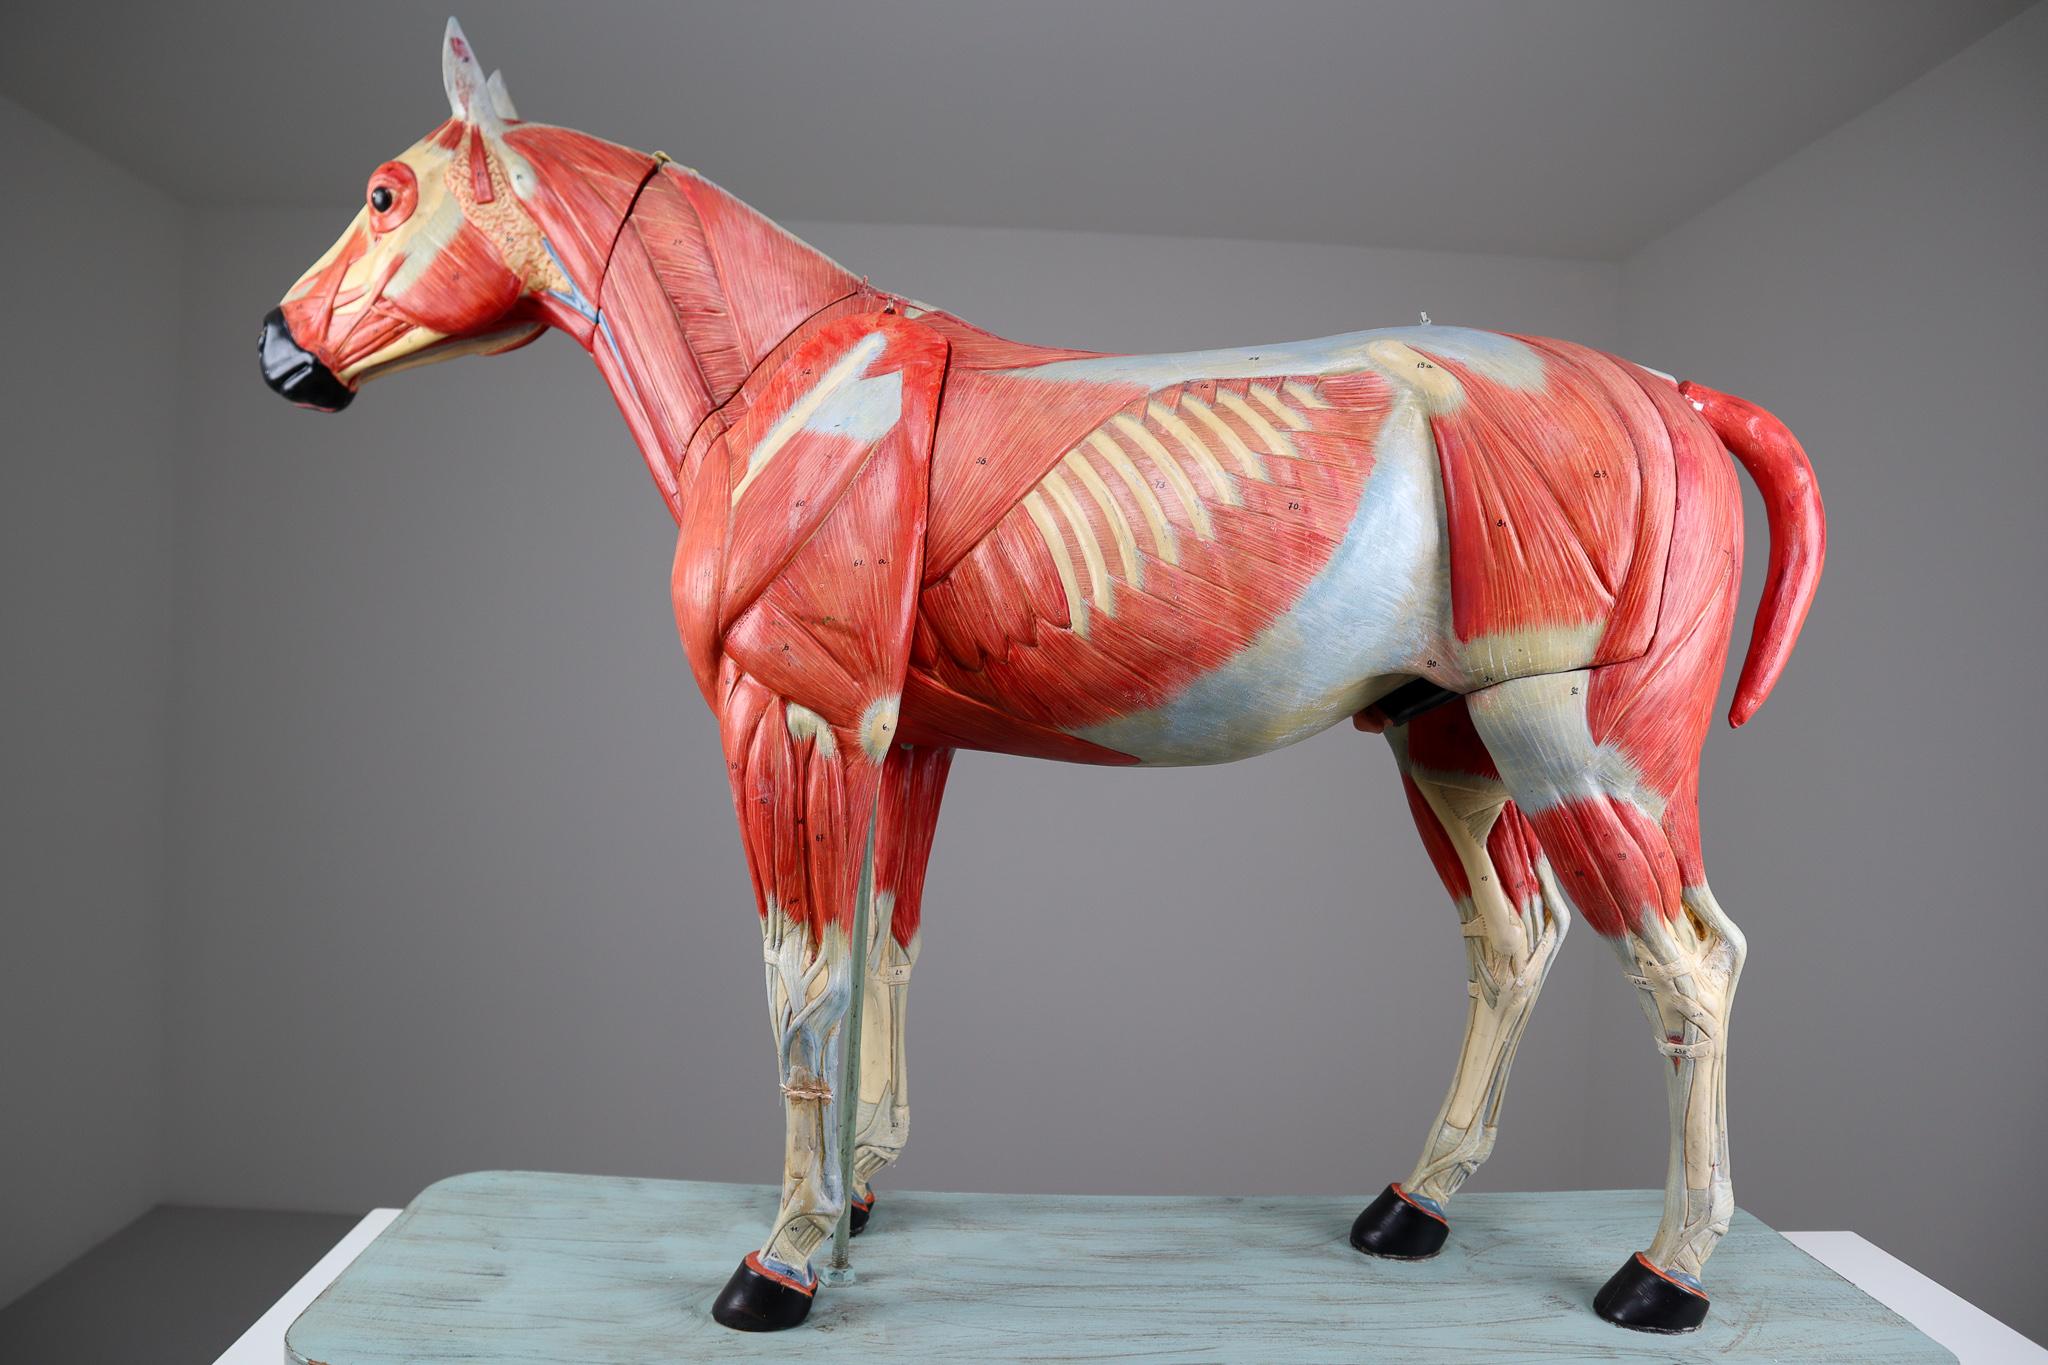 This is an important handmade large scale paper mâché anatomical model of a horse by Somso Germany 1920s. At the turn of the century France and Berlin were known for their elaborate teaching models. We just returned from Germany with a few rare